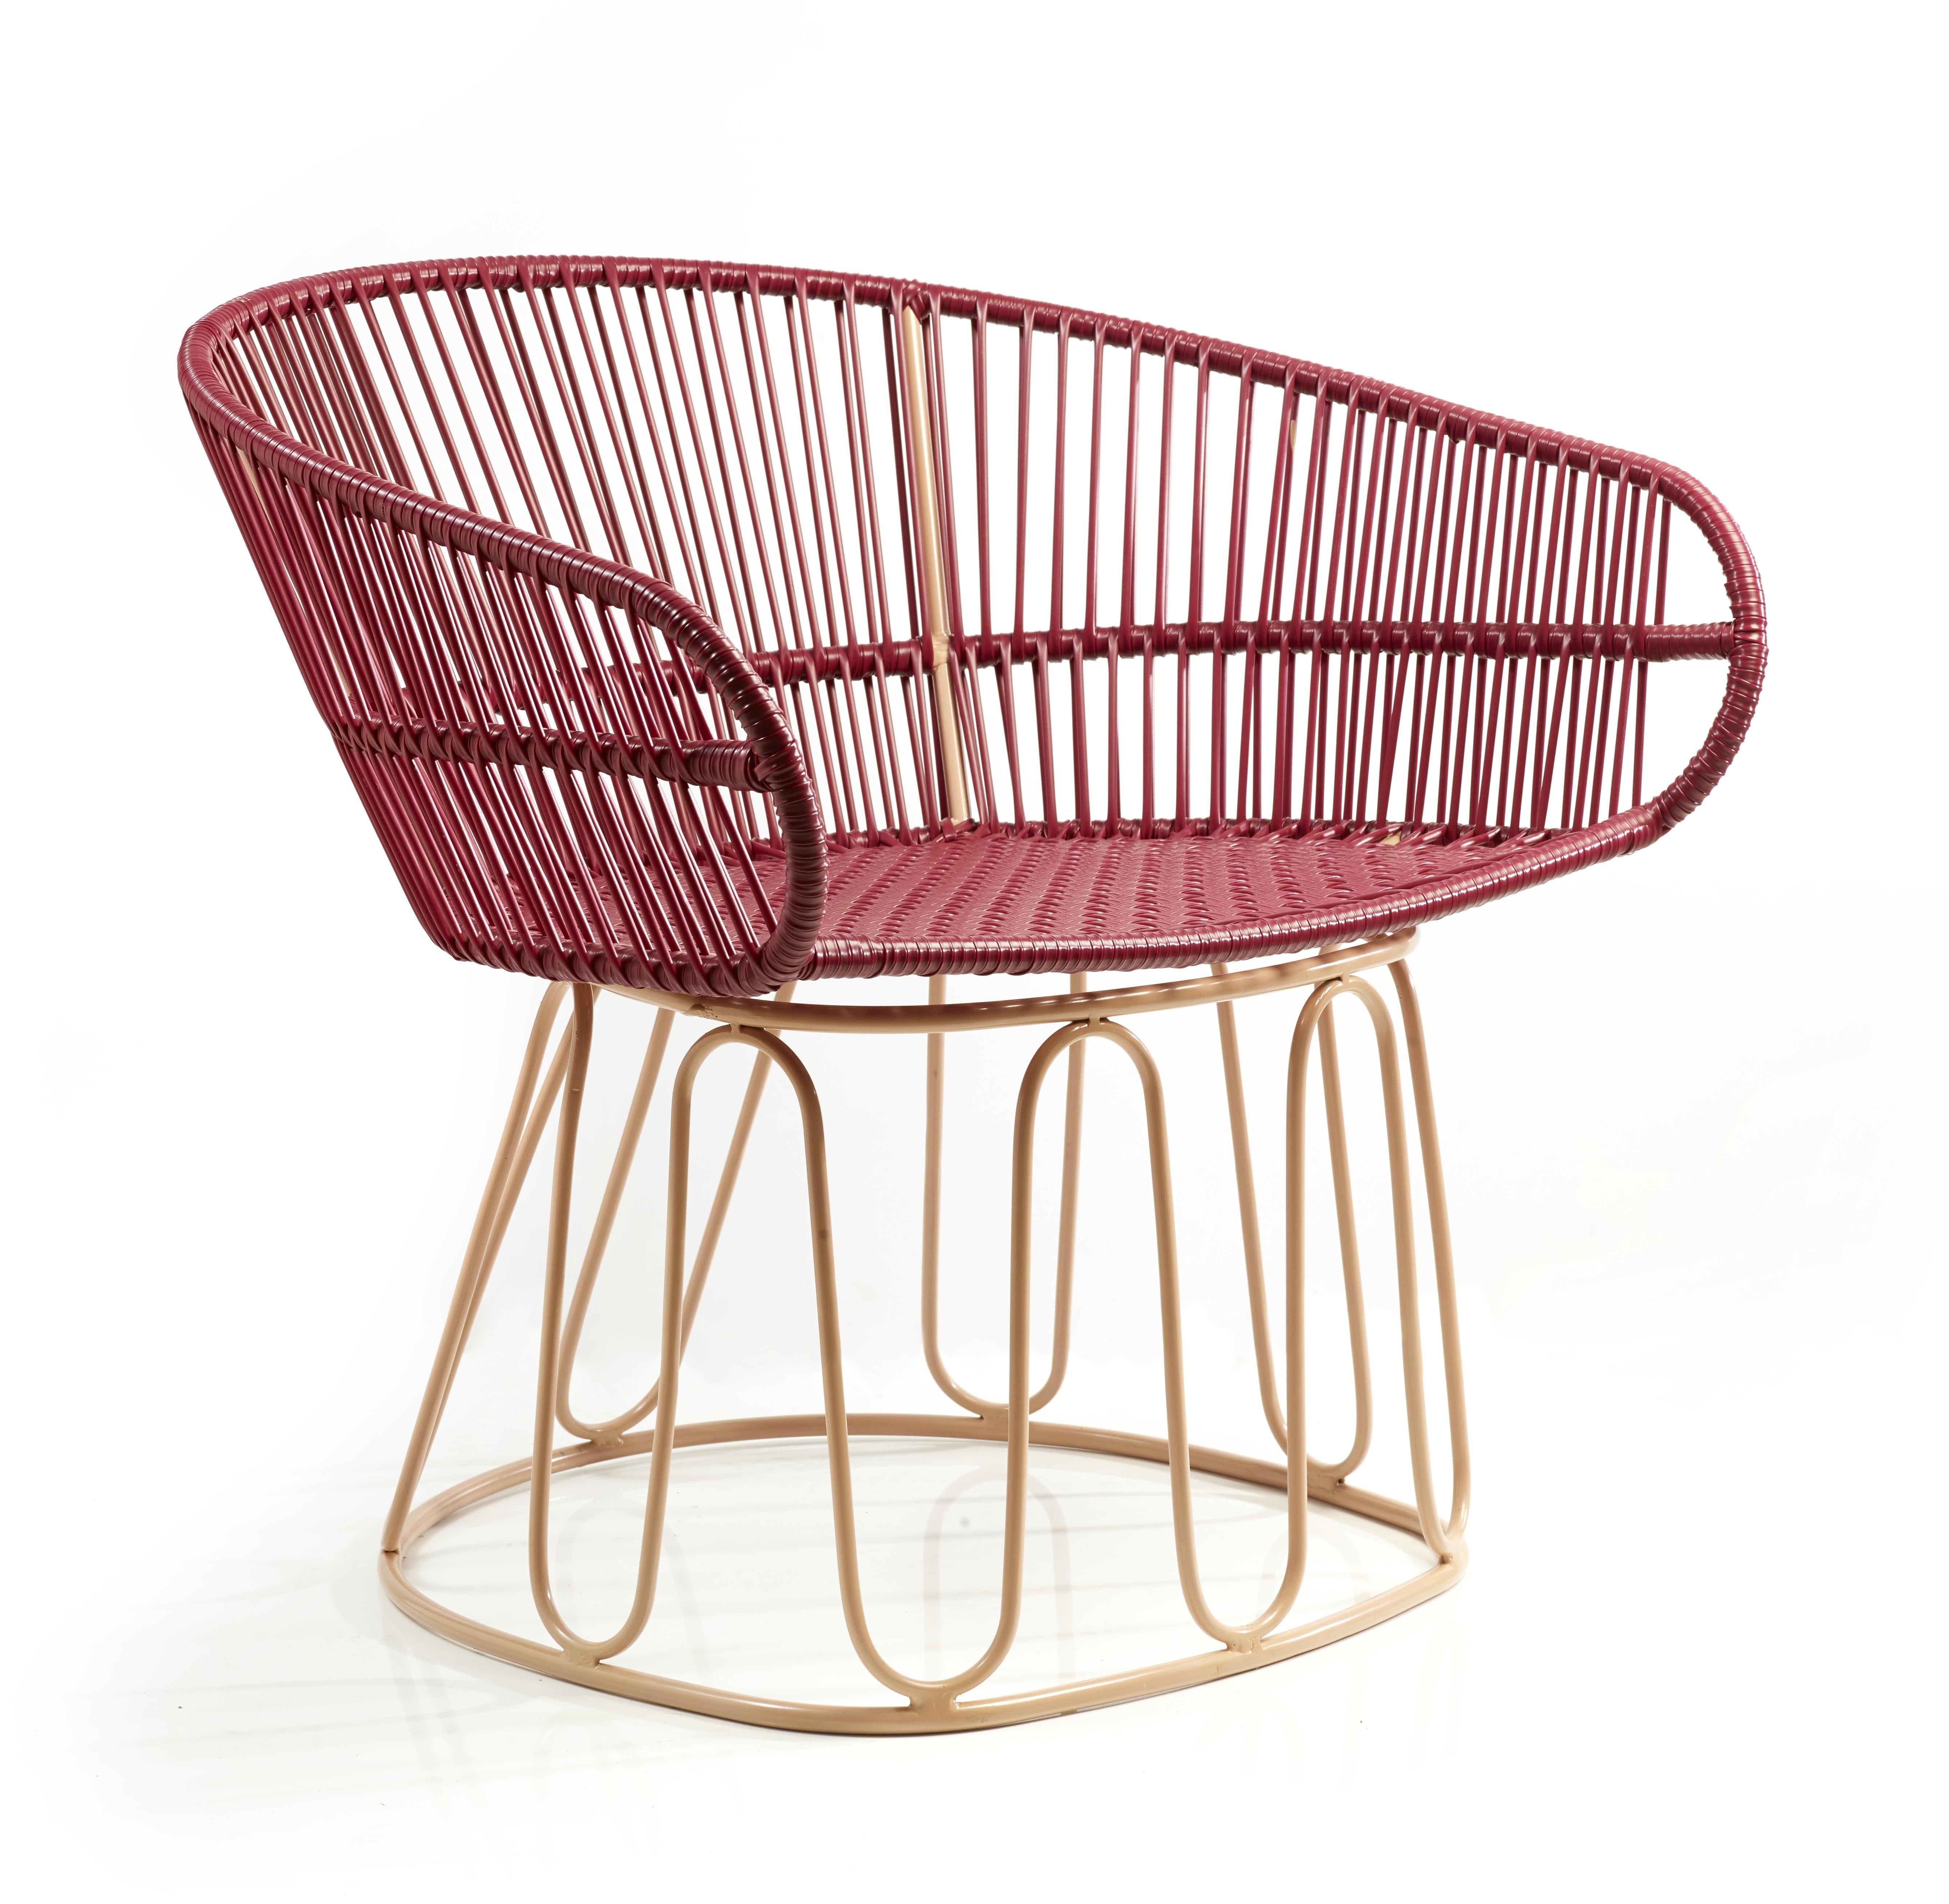 Set of 4 Purple circo lounge chair by Sebastian Herkner
Materials: galvanized and powder-coated tubular steel. PVC strings.
Technique: made from recycled plastic. Weaved by local craftspeople in Colombia. 
Dimensions: W 74 x D 66.2 x H 73 cm